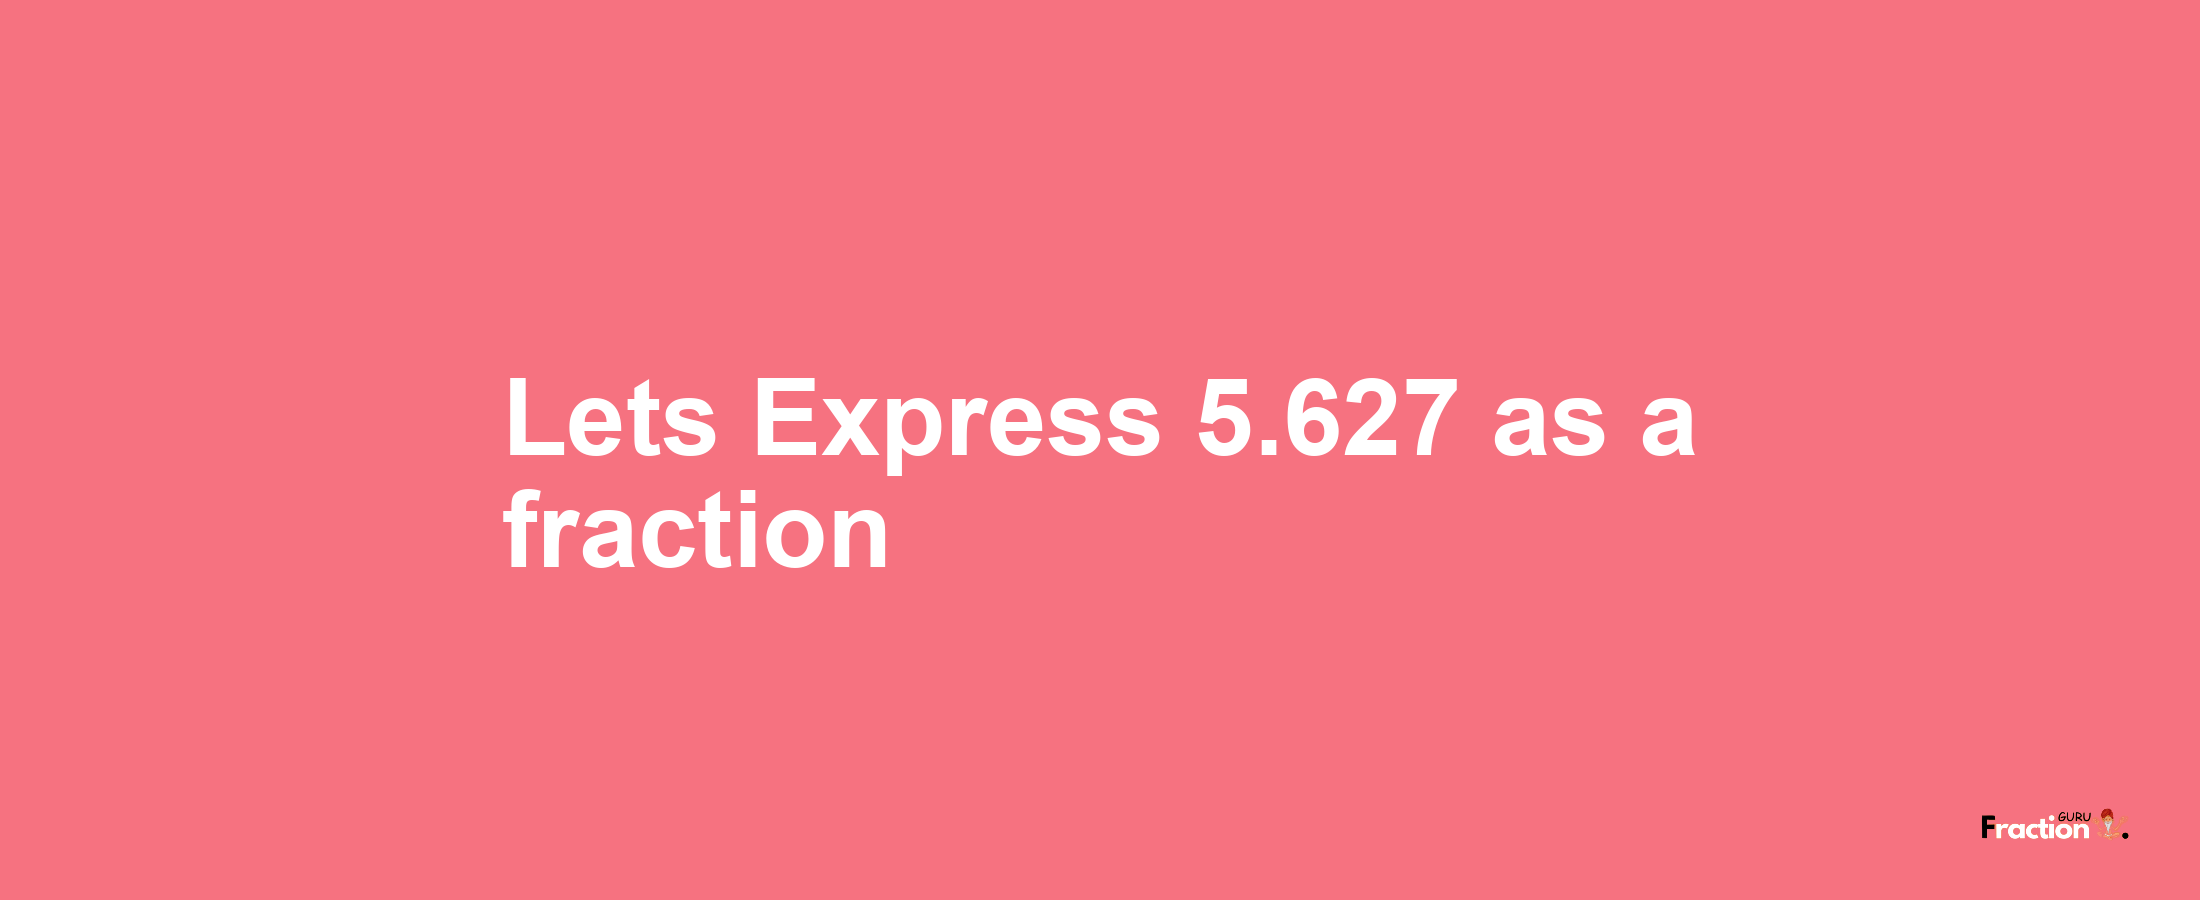 Lets Express 5.627 as afraction